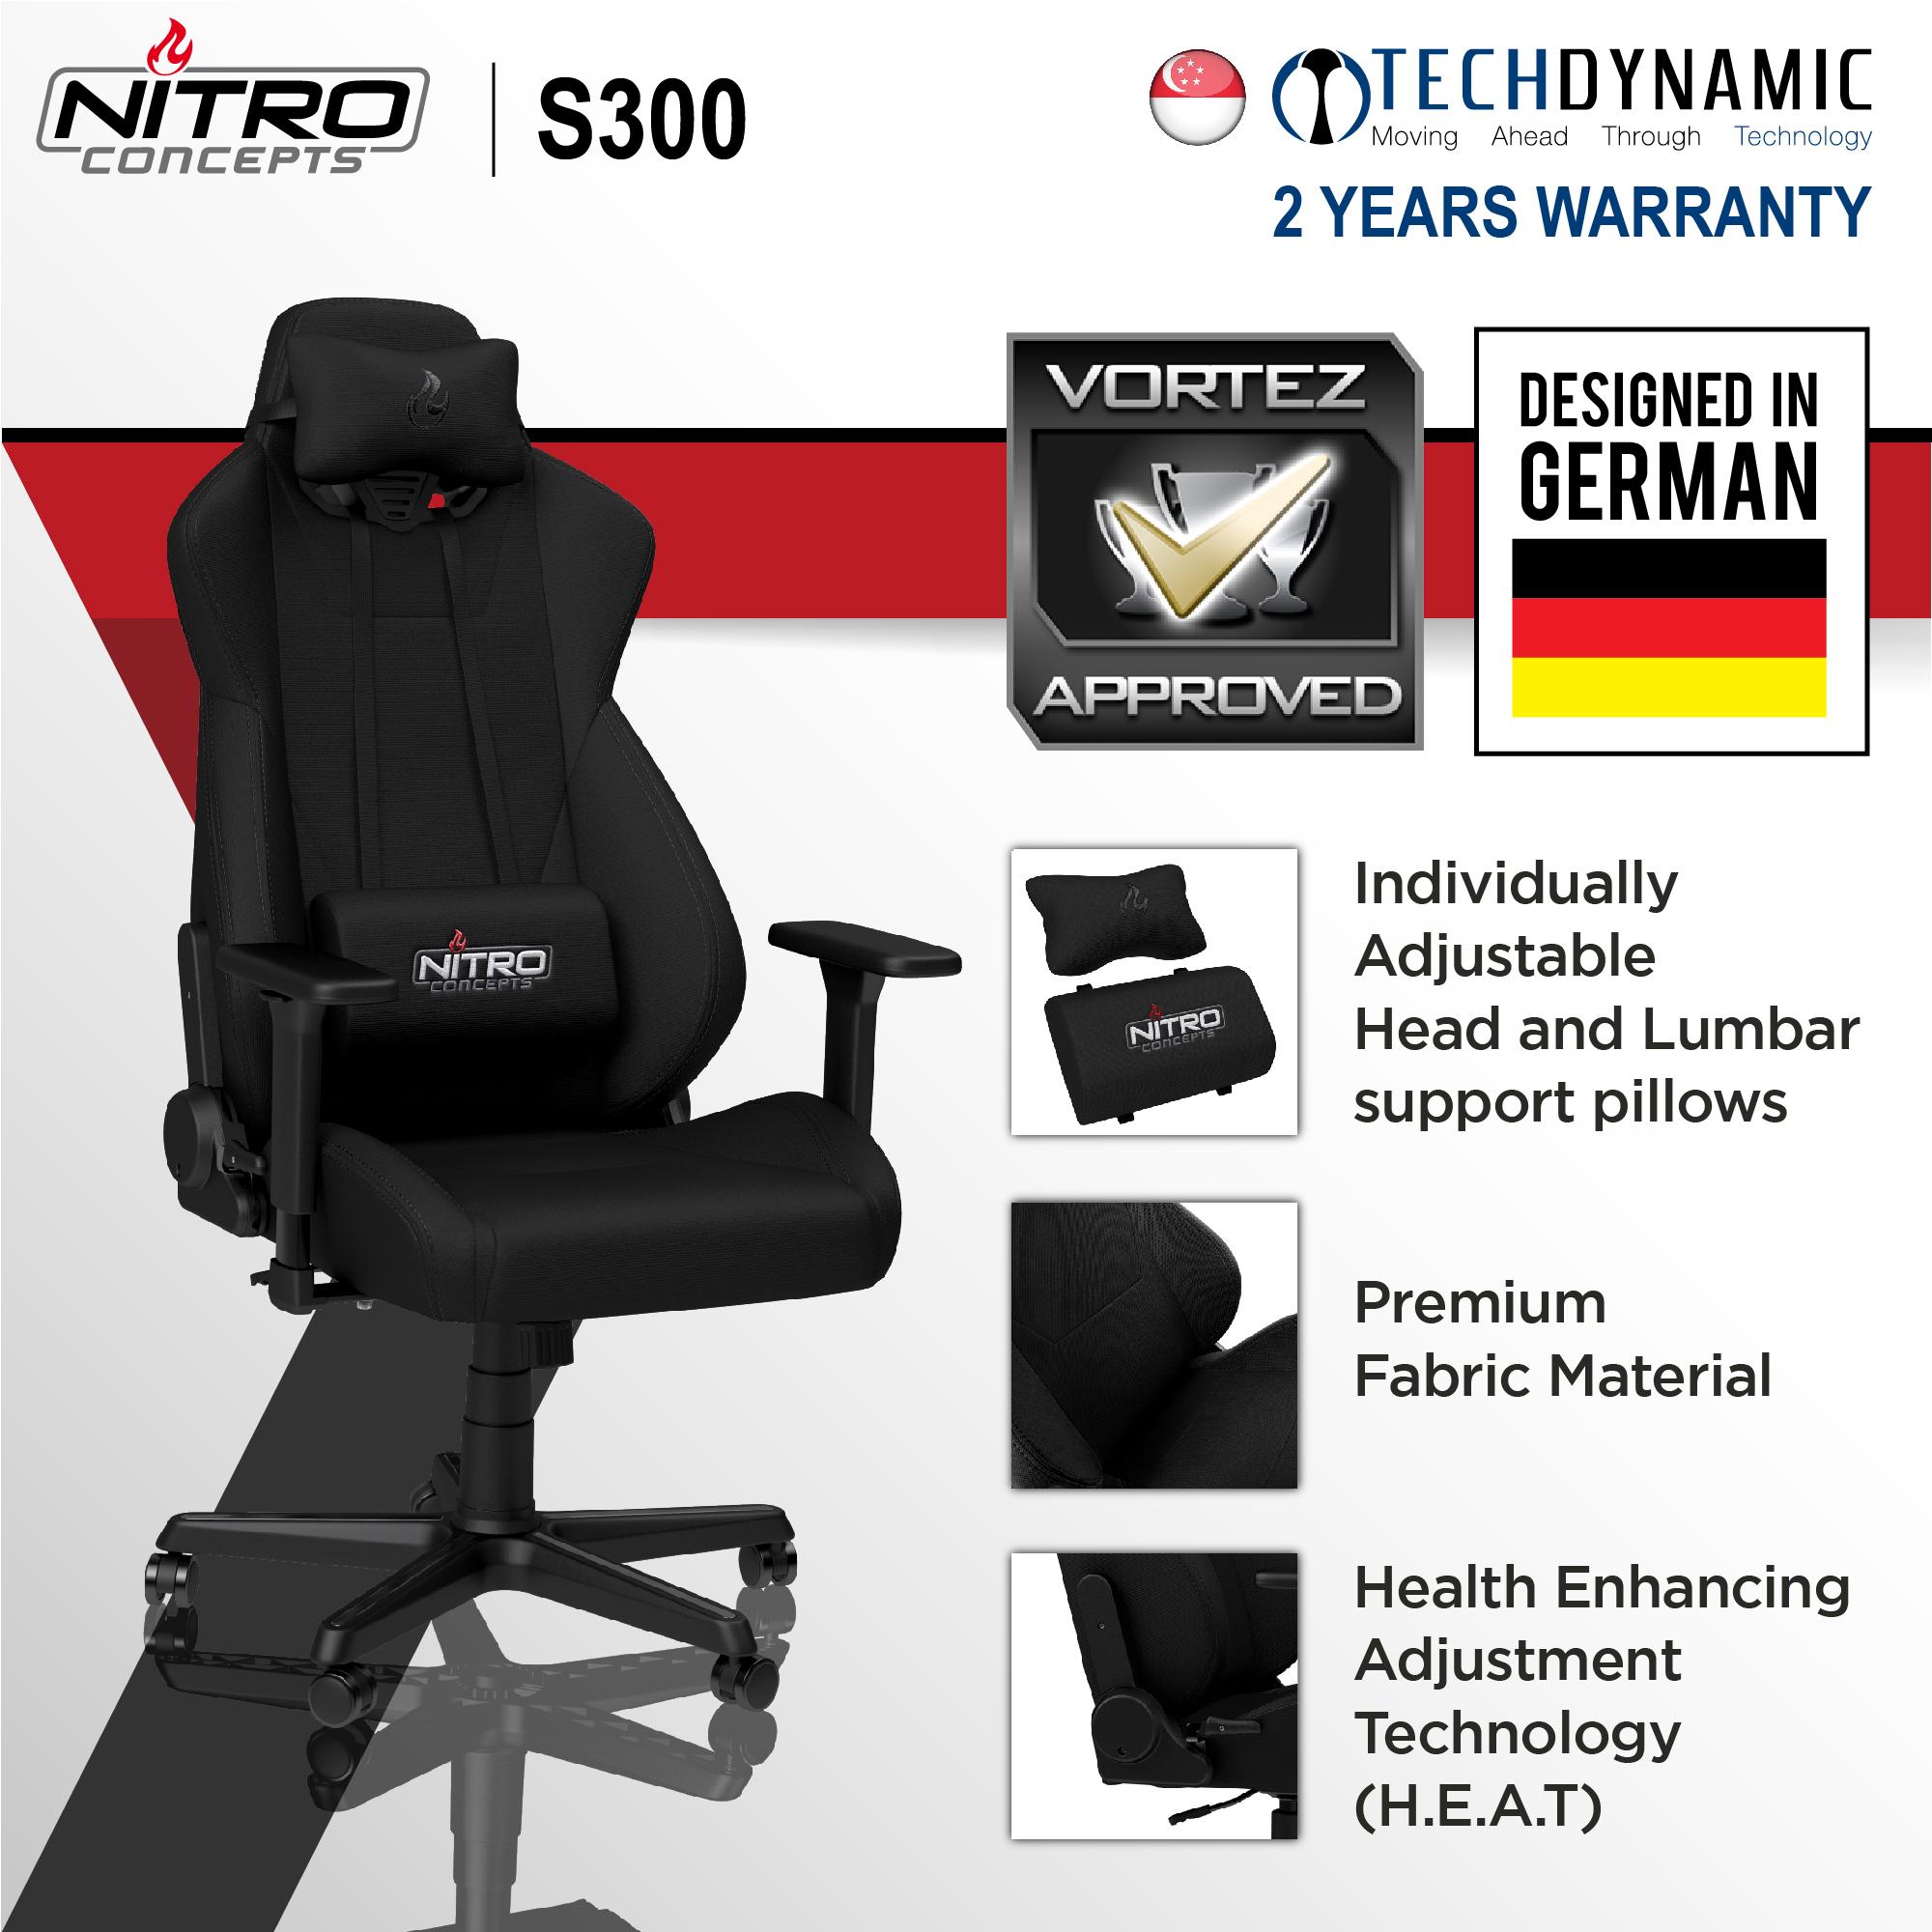 Nitro Concepts S300 Fabric Gaming Chair Black Black Red Black White Available In 3 Colors To Be Delivered Within 1 Week From Order Date Lazada Singapore